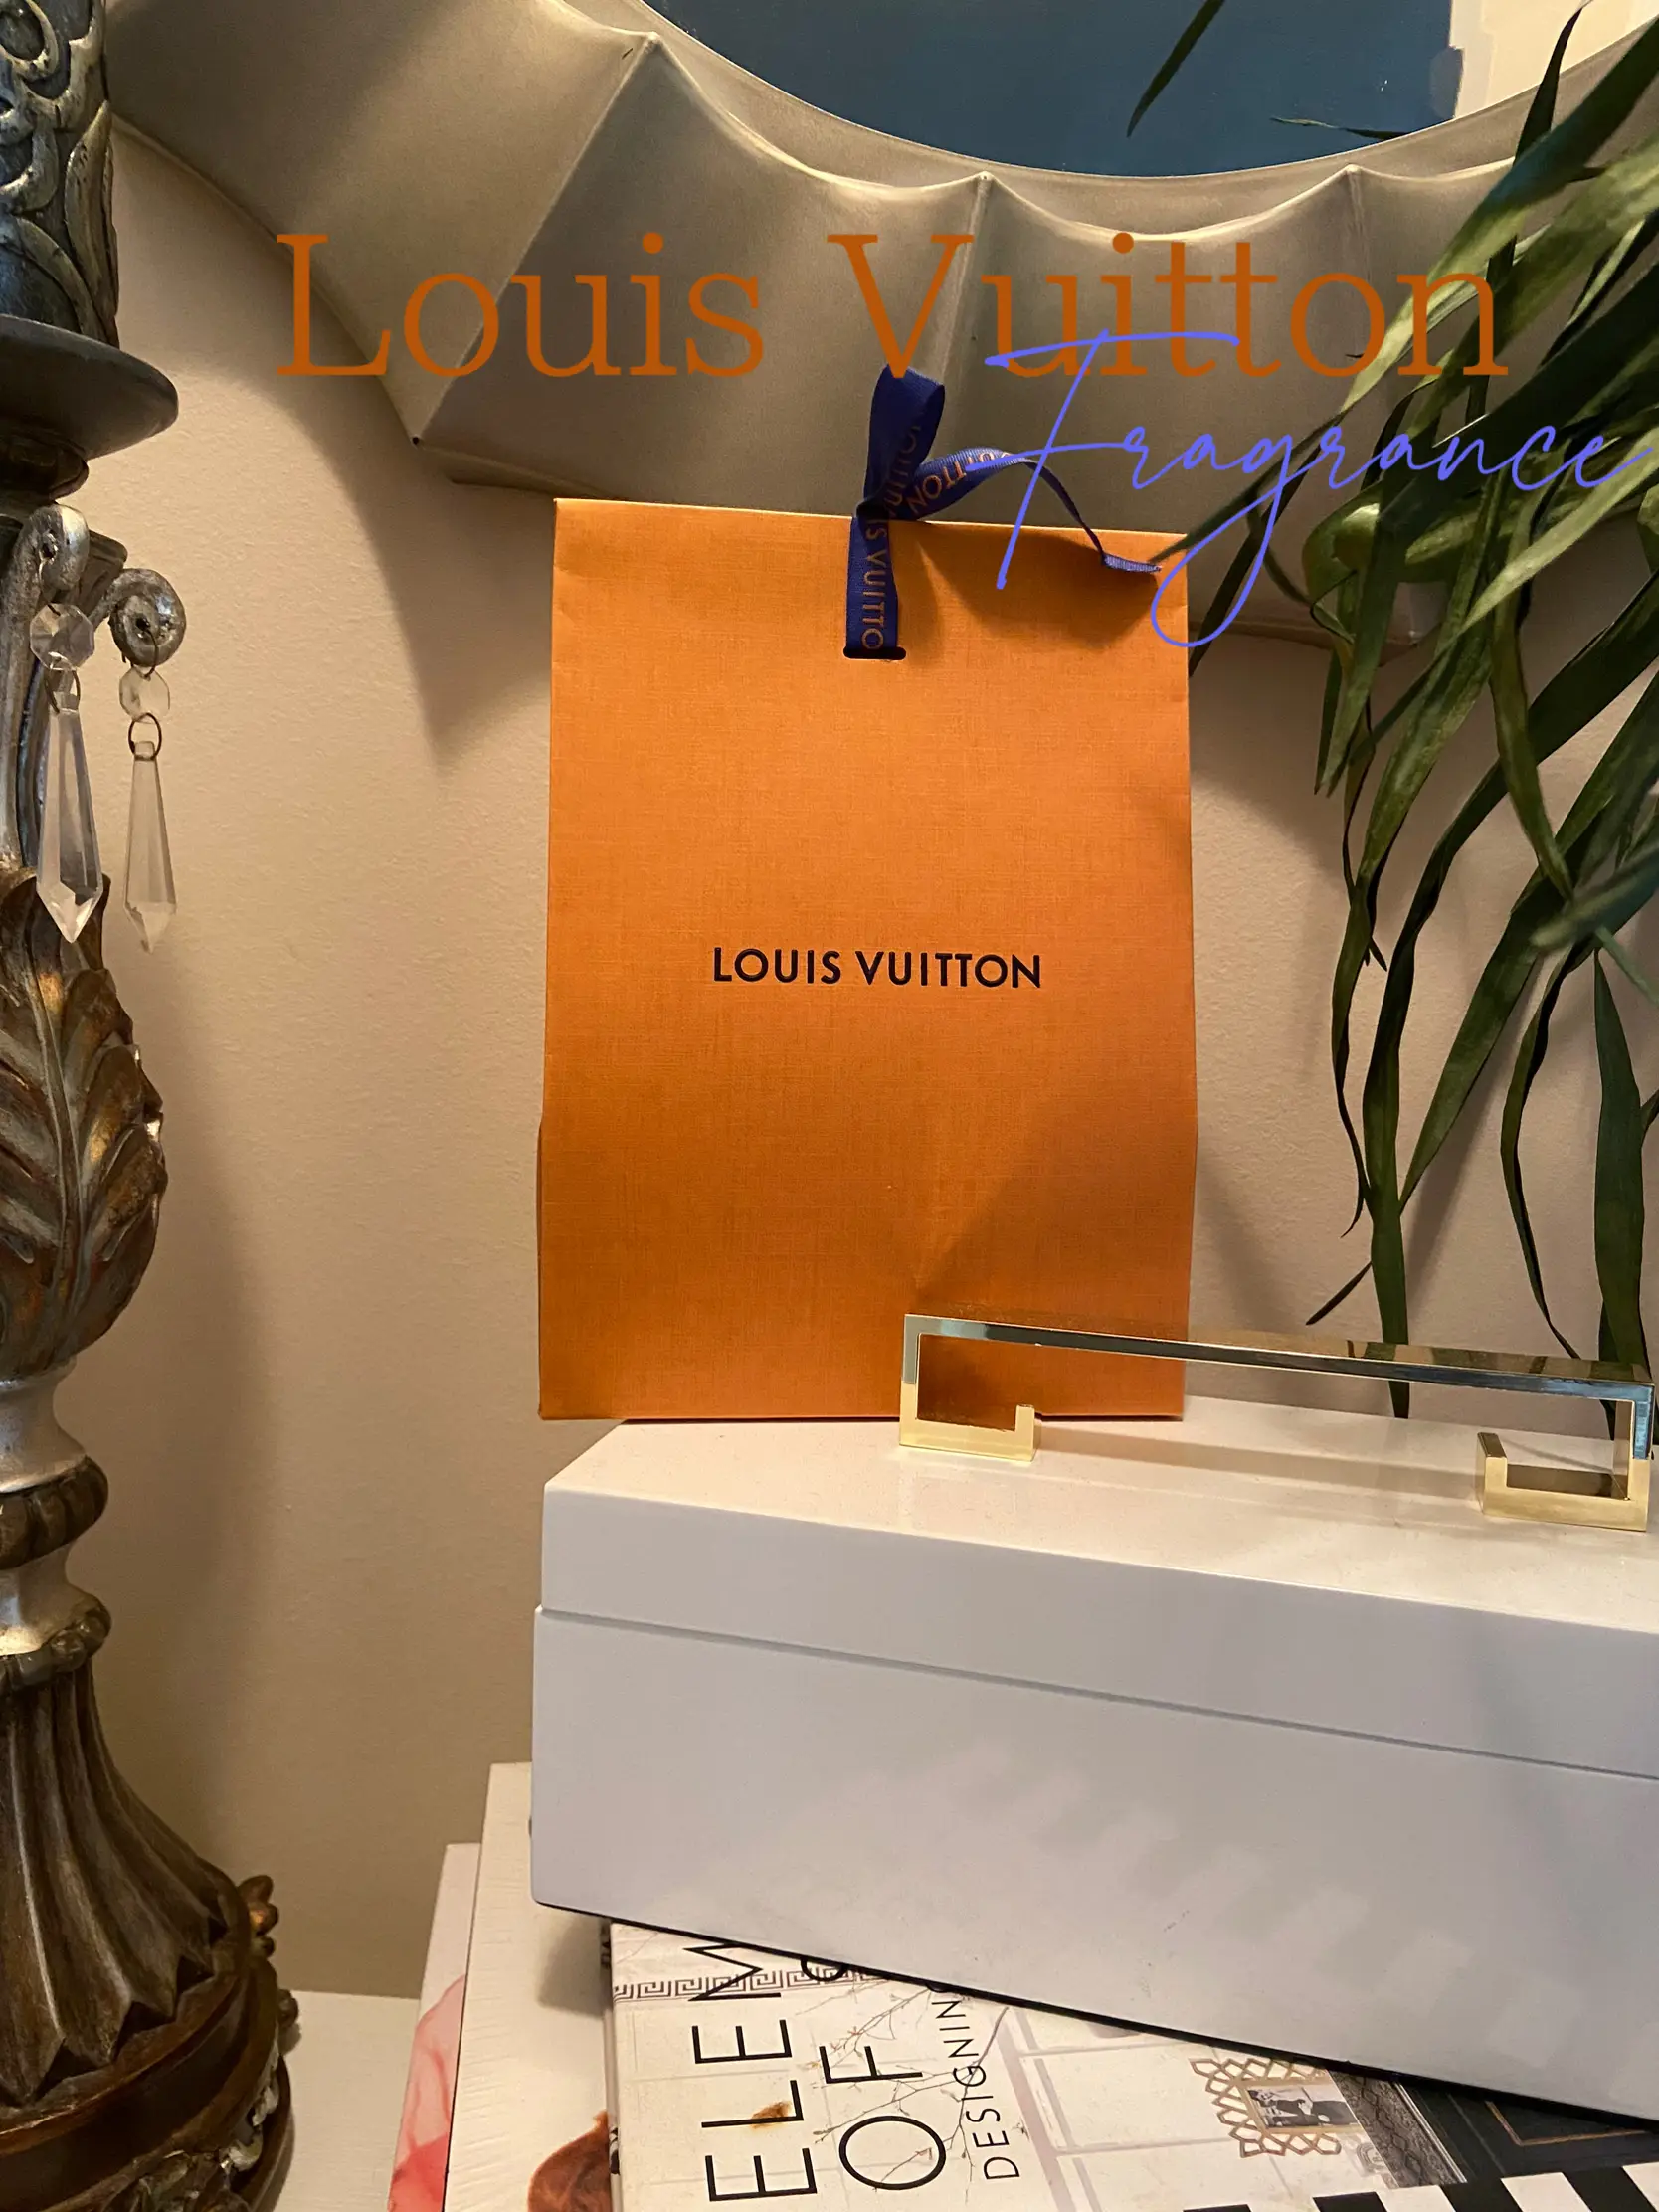 Coeur Battant by Louis Vuitton is a fresh, green, slightly sweet